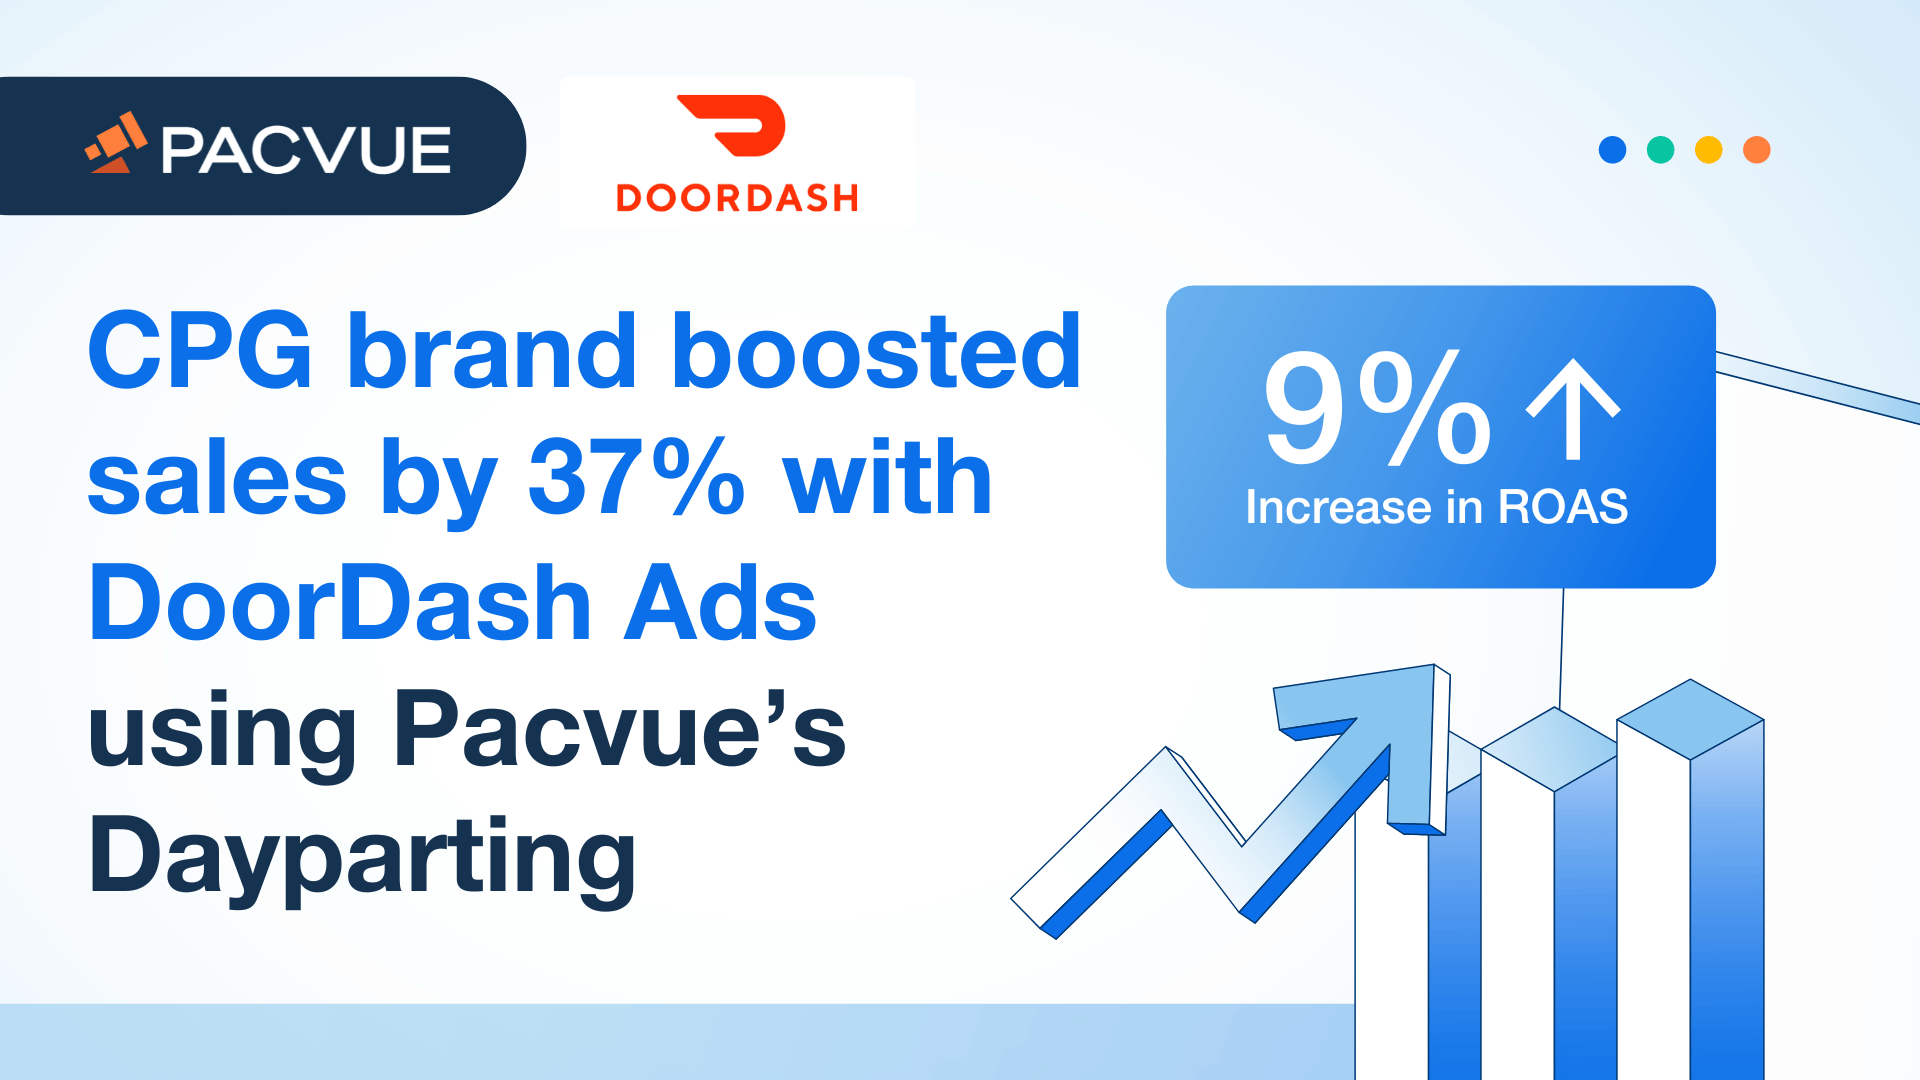 CPG brand boosted sales by 37% with DoorDash Ads using Pacvue’s Dayparting